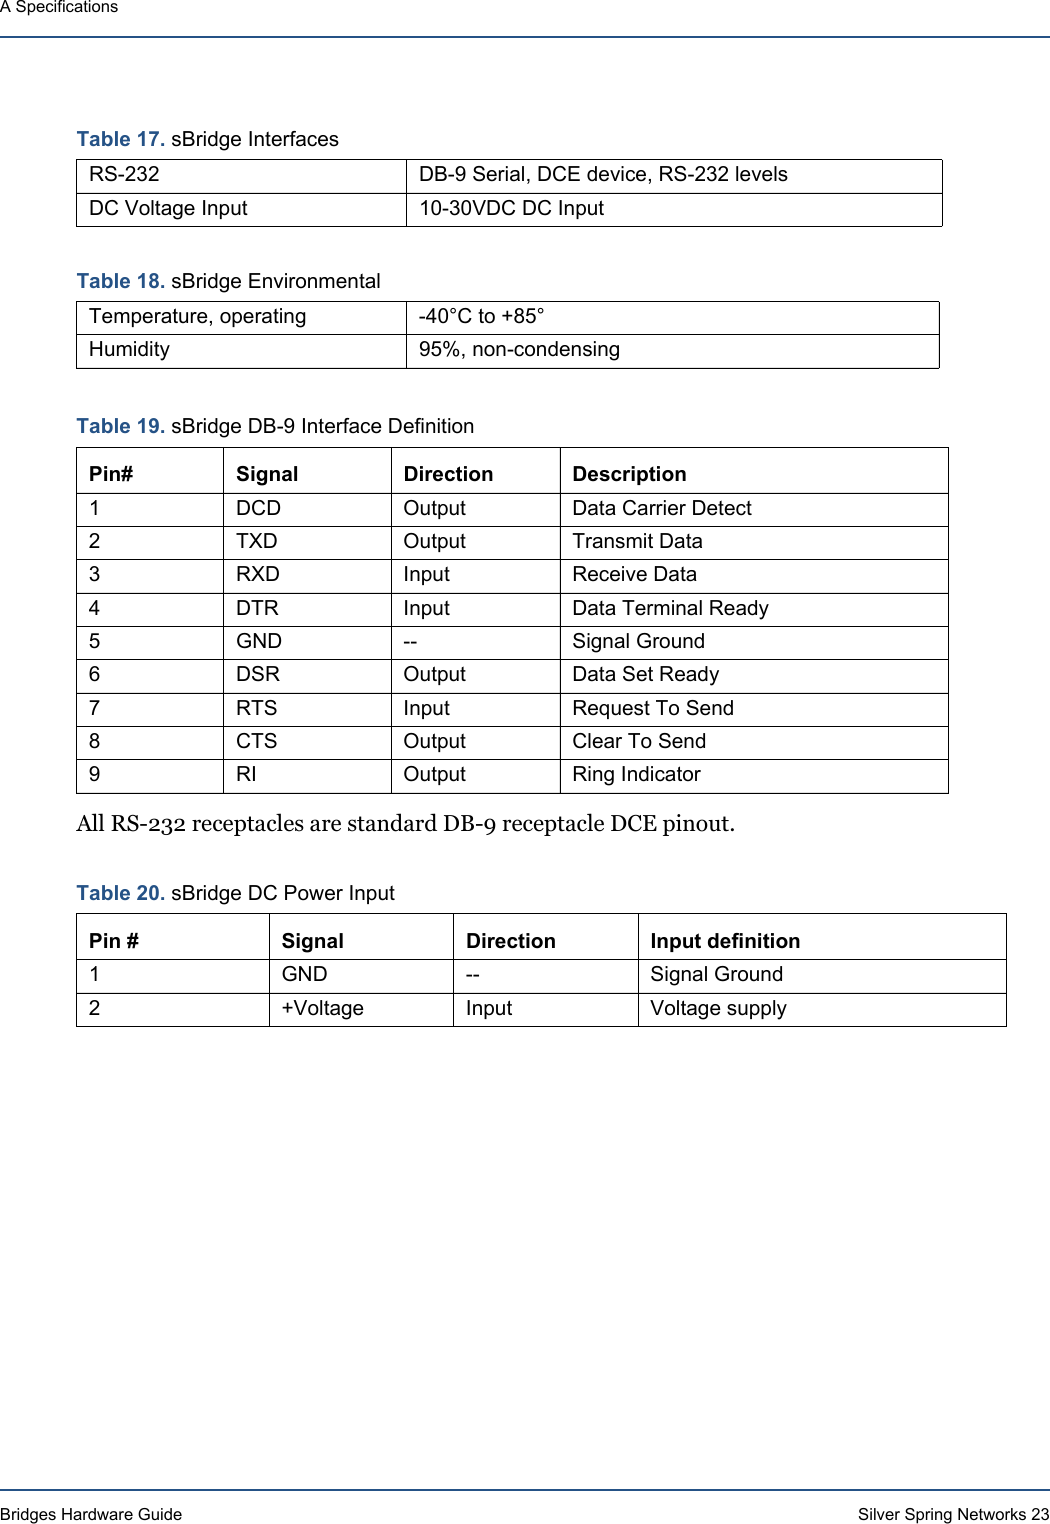 Bridges Hardware Guide Silver Spring Networks 23A SpecificationsAll RS-232 receptacles are standard DB-9 receptacle DCE pinout.Table 17. sBridge InterfacesRS-232 DB-9 Serial, DCE device, RS-232 levelsDC Voltage Input 10-30VDC DC InputTable 18. sBridge EnvironmentalTemperature, operating -40°C to +85°Humidity 95%, non-condensingTable 19. sBridge DB-9 Interface DefinitionPin# Signal Direction Description1 DCD Output Data Carrier Detect2 TXD Output Transmit Data3 RXD Input Receive Data4 DTR Input Data Terminal Ready5 GND -- Signal Ground6 DSR Output Data Set Ready7 RTS Input Request To Send8 CTS Output Clear To Send9 RI Output Ring IndicatorTable 20. sBridge DC Power Input Pin # Signal Direction Input definition1 GND -- Signal Ground2 +Voltage Input Voltage supply